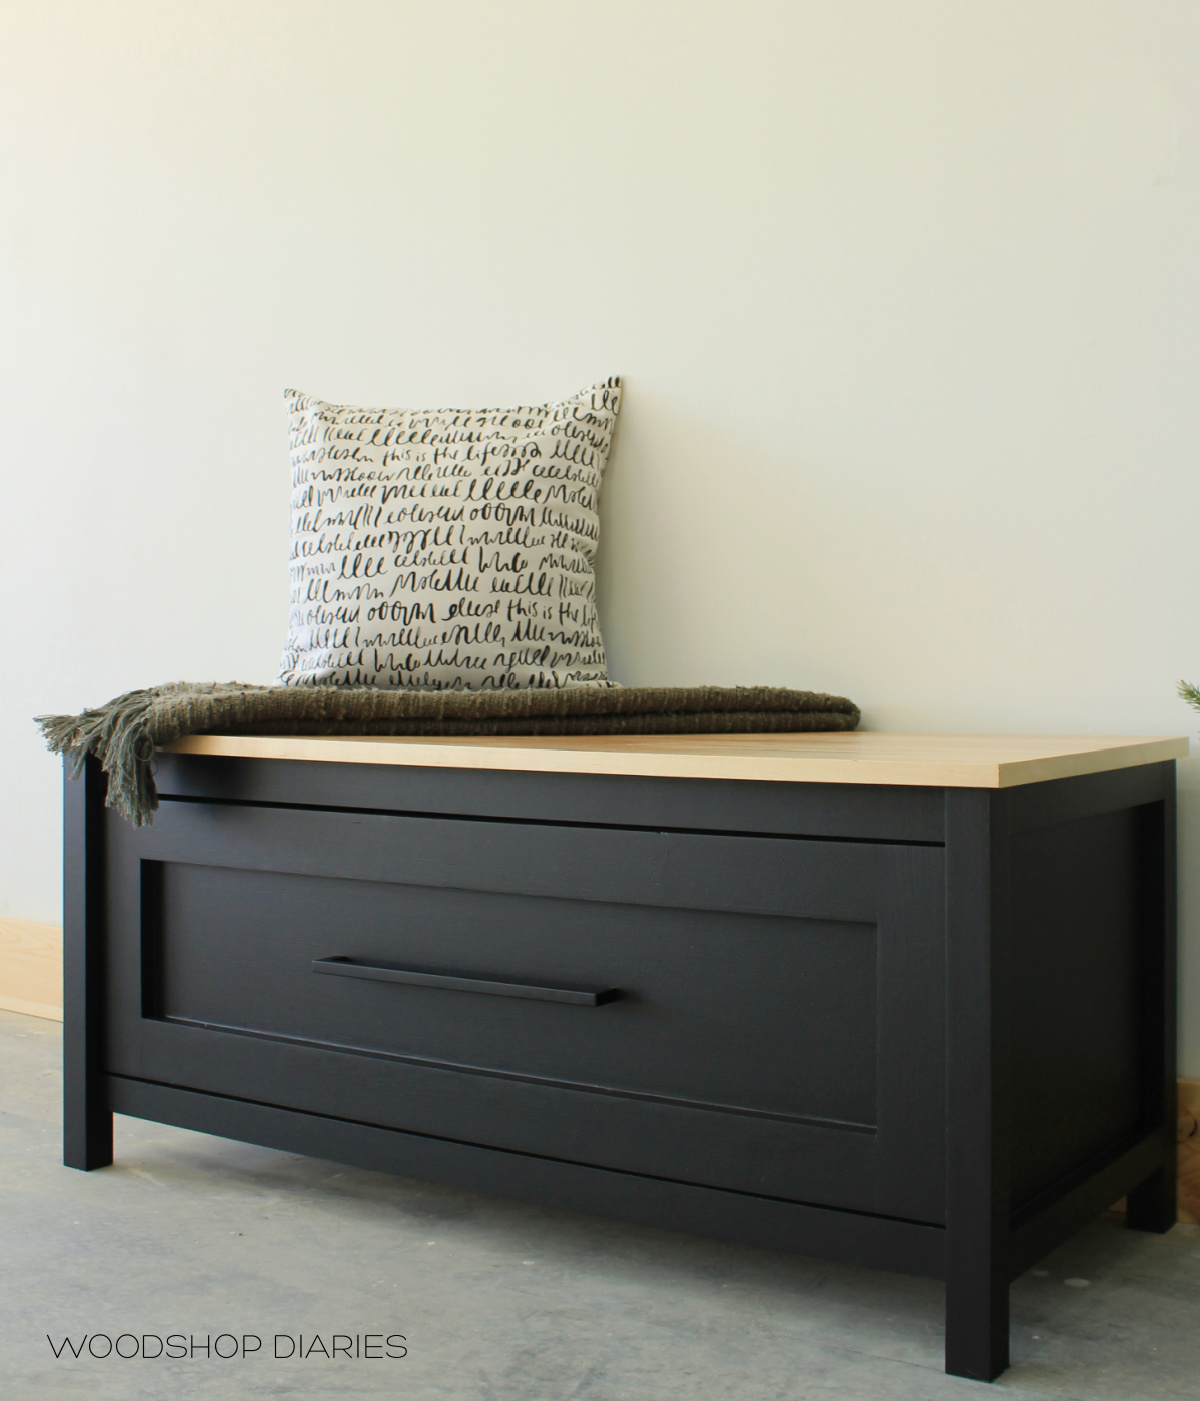 Black and wood DIY storage bench with large drawer against white wall